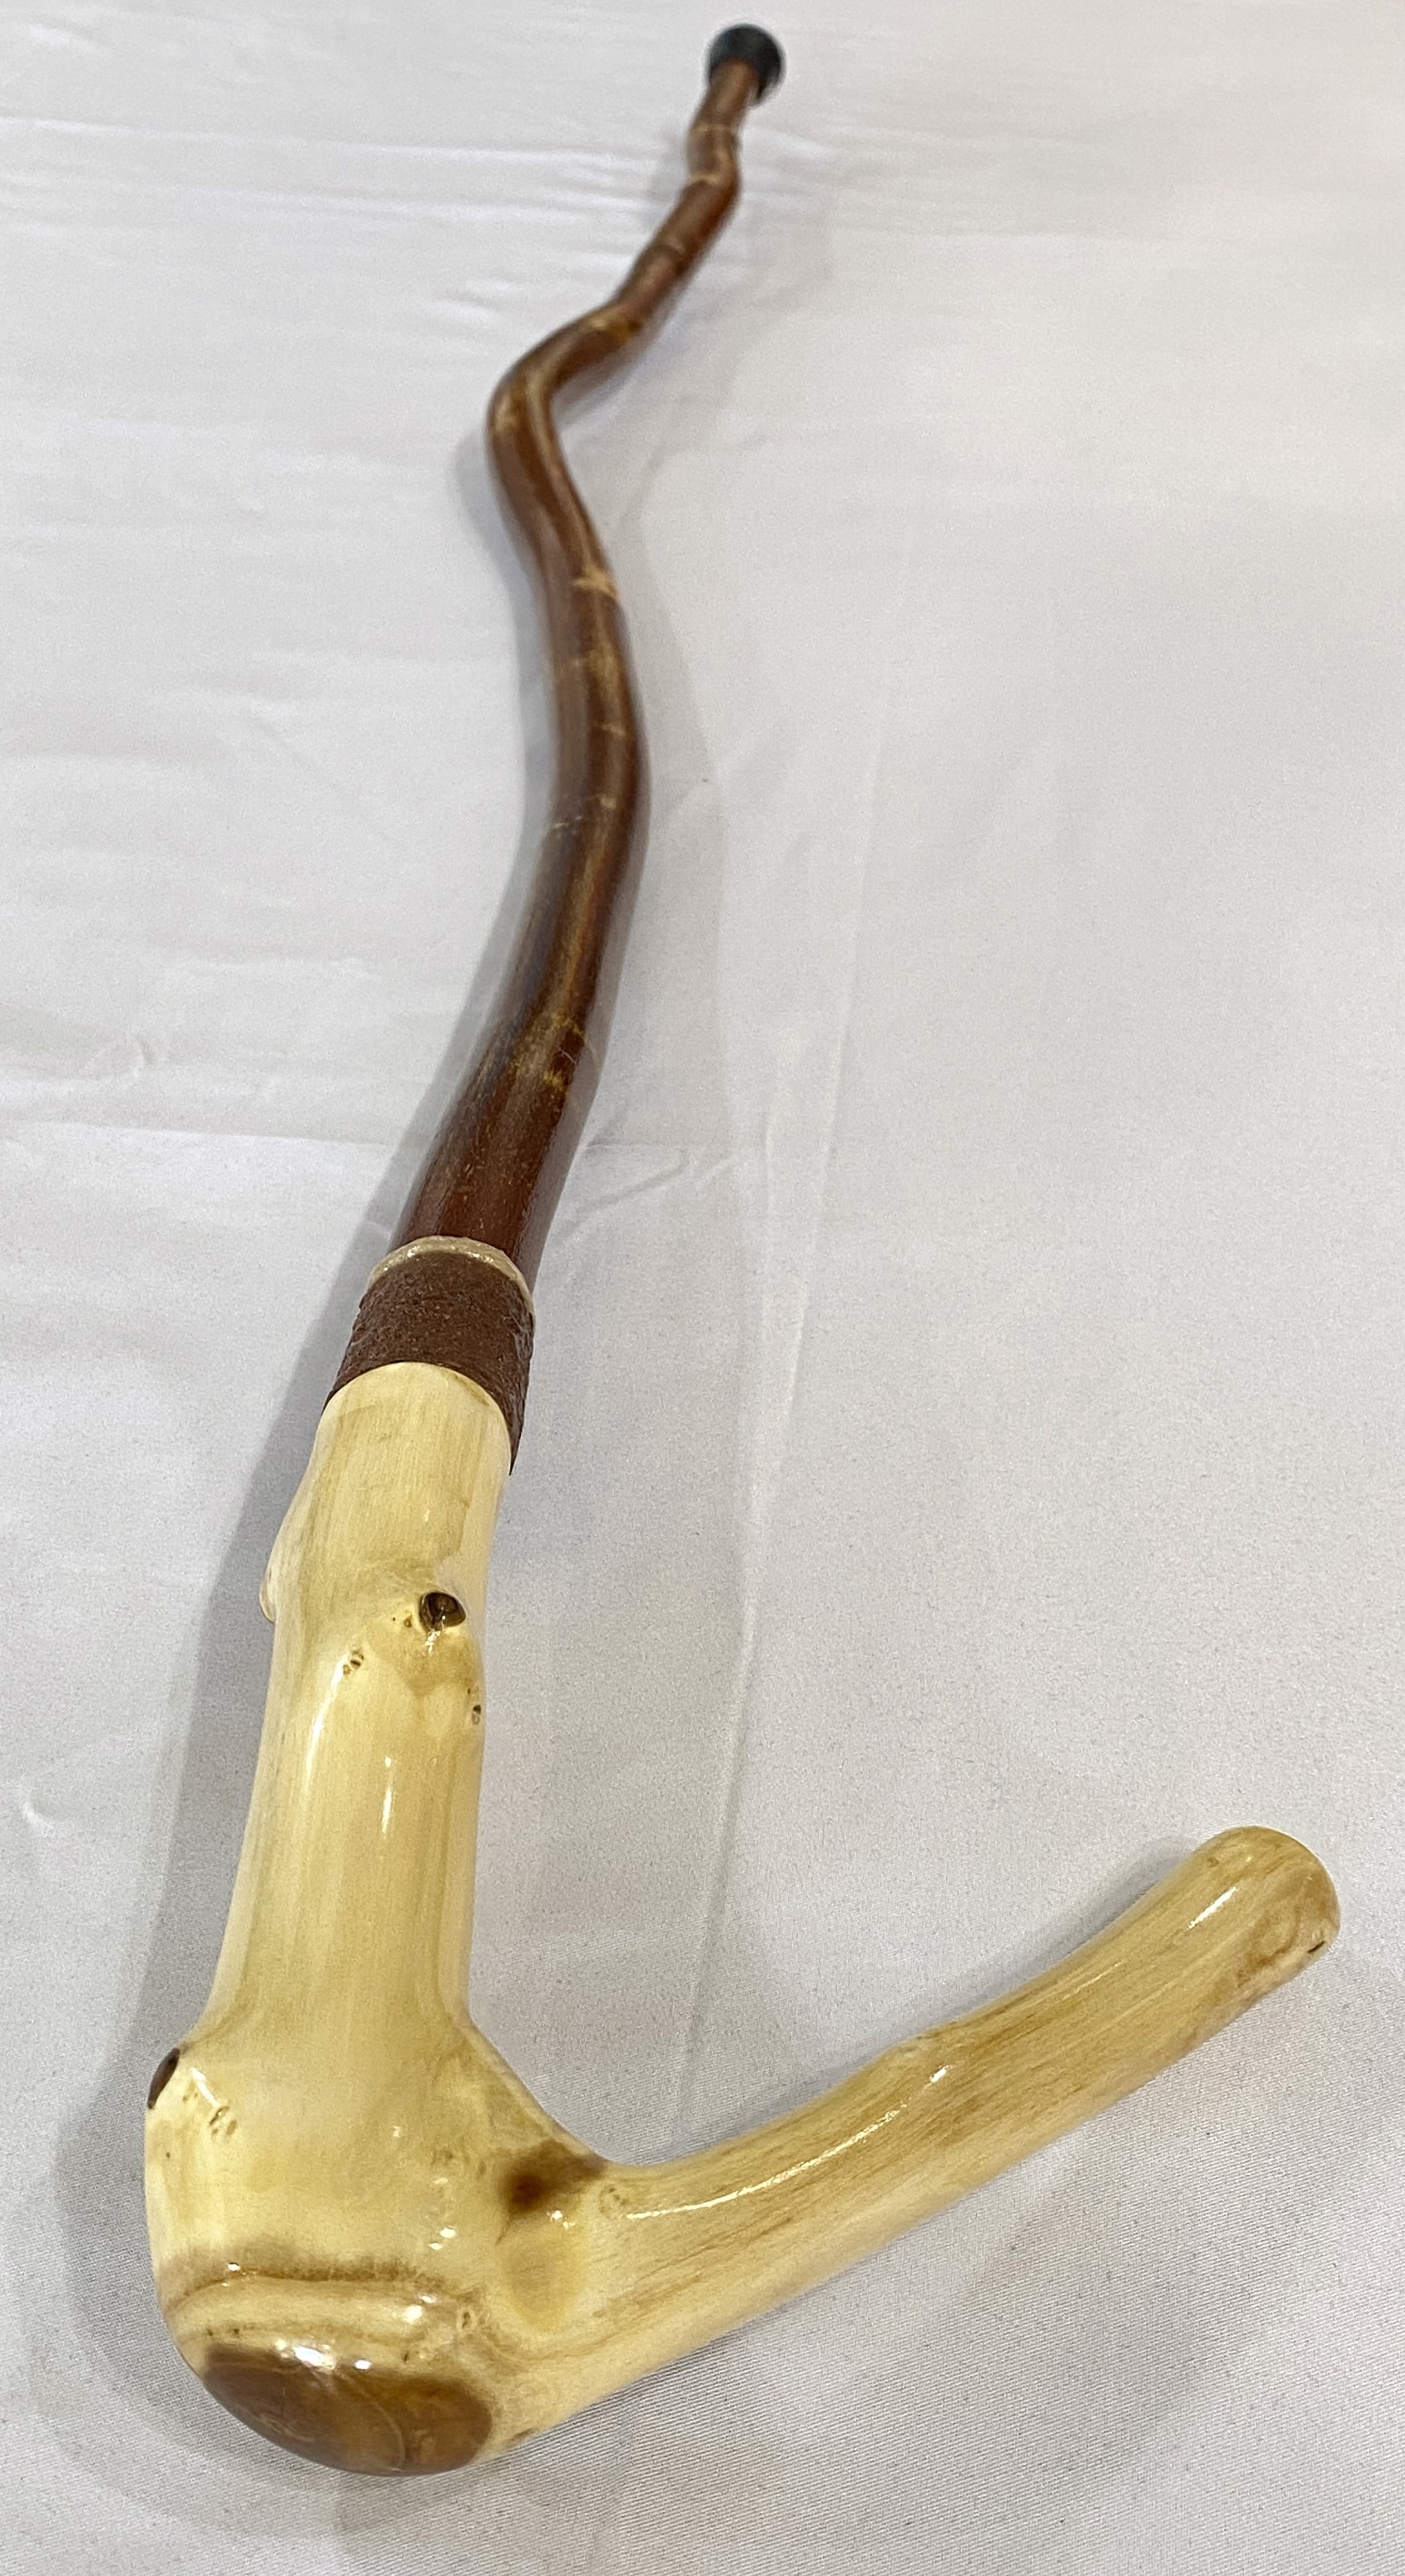 Wooden Walking Stick #7 by Kevin Foote